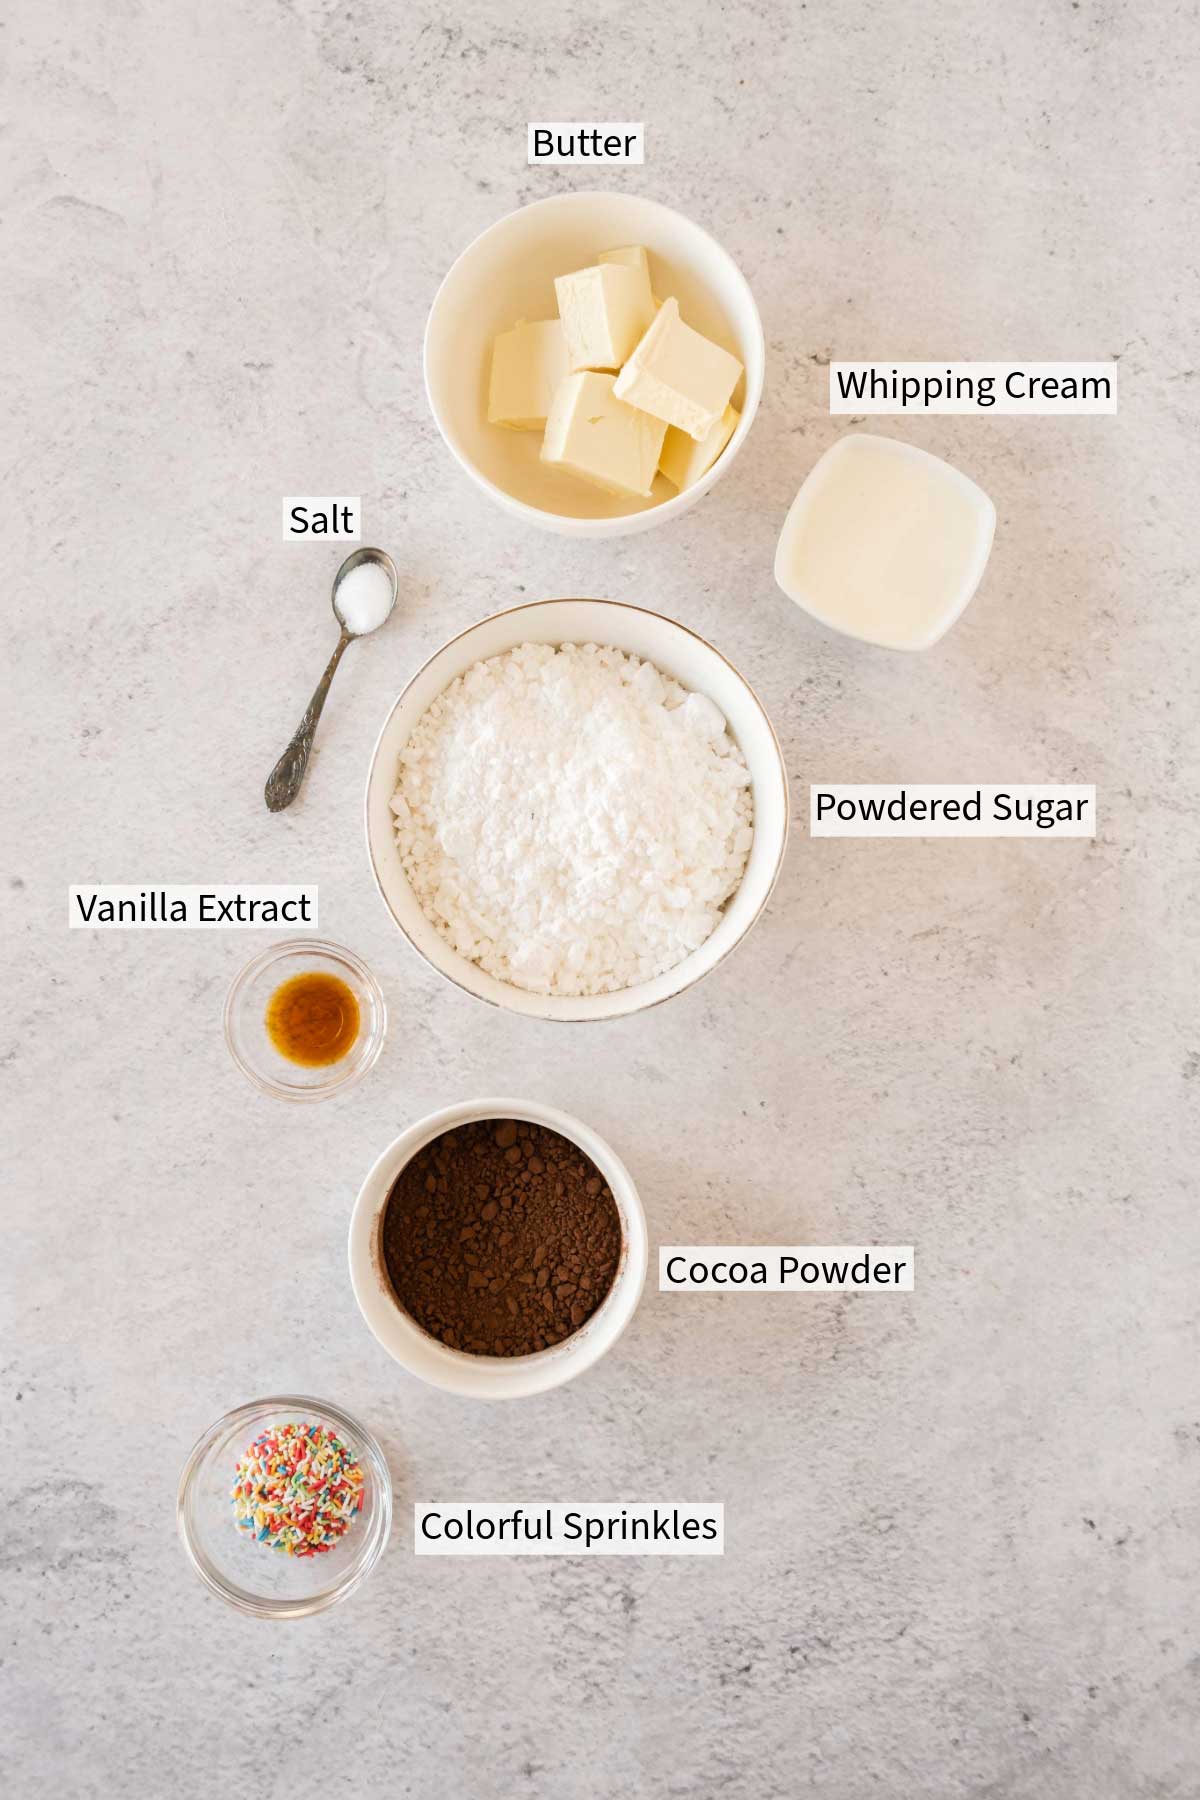 Ingredients for chocolate buttercream frosting on a kitchen counter, labeled individually.